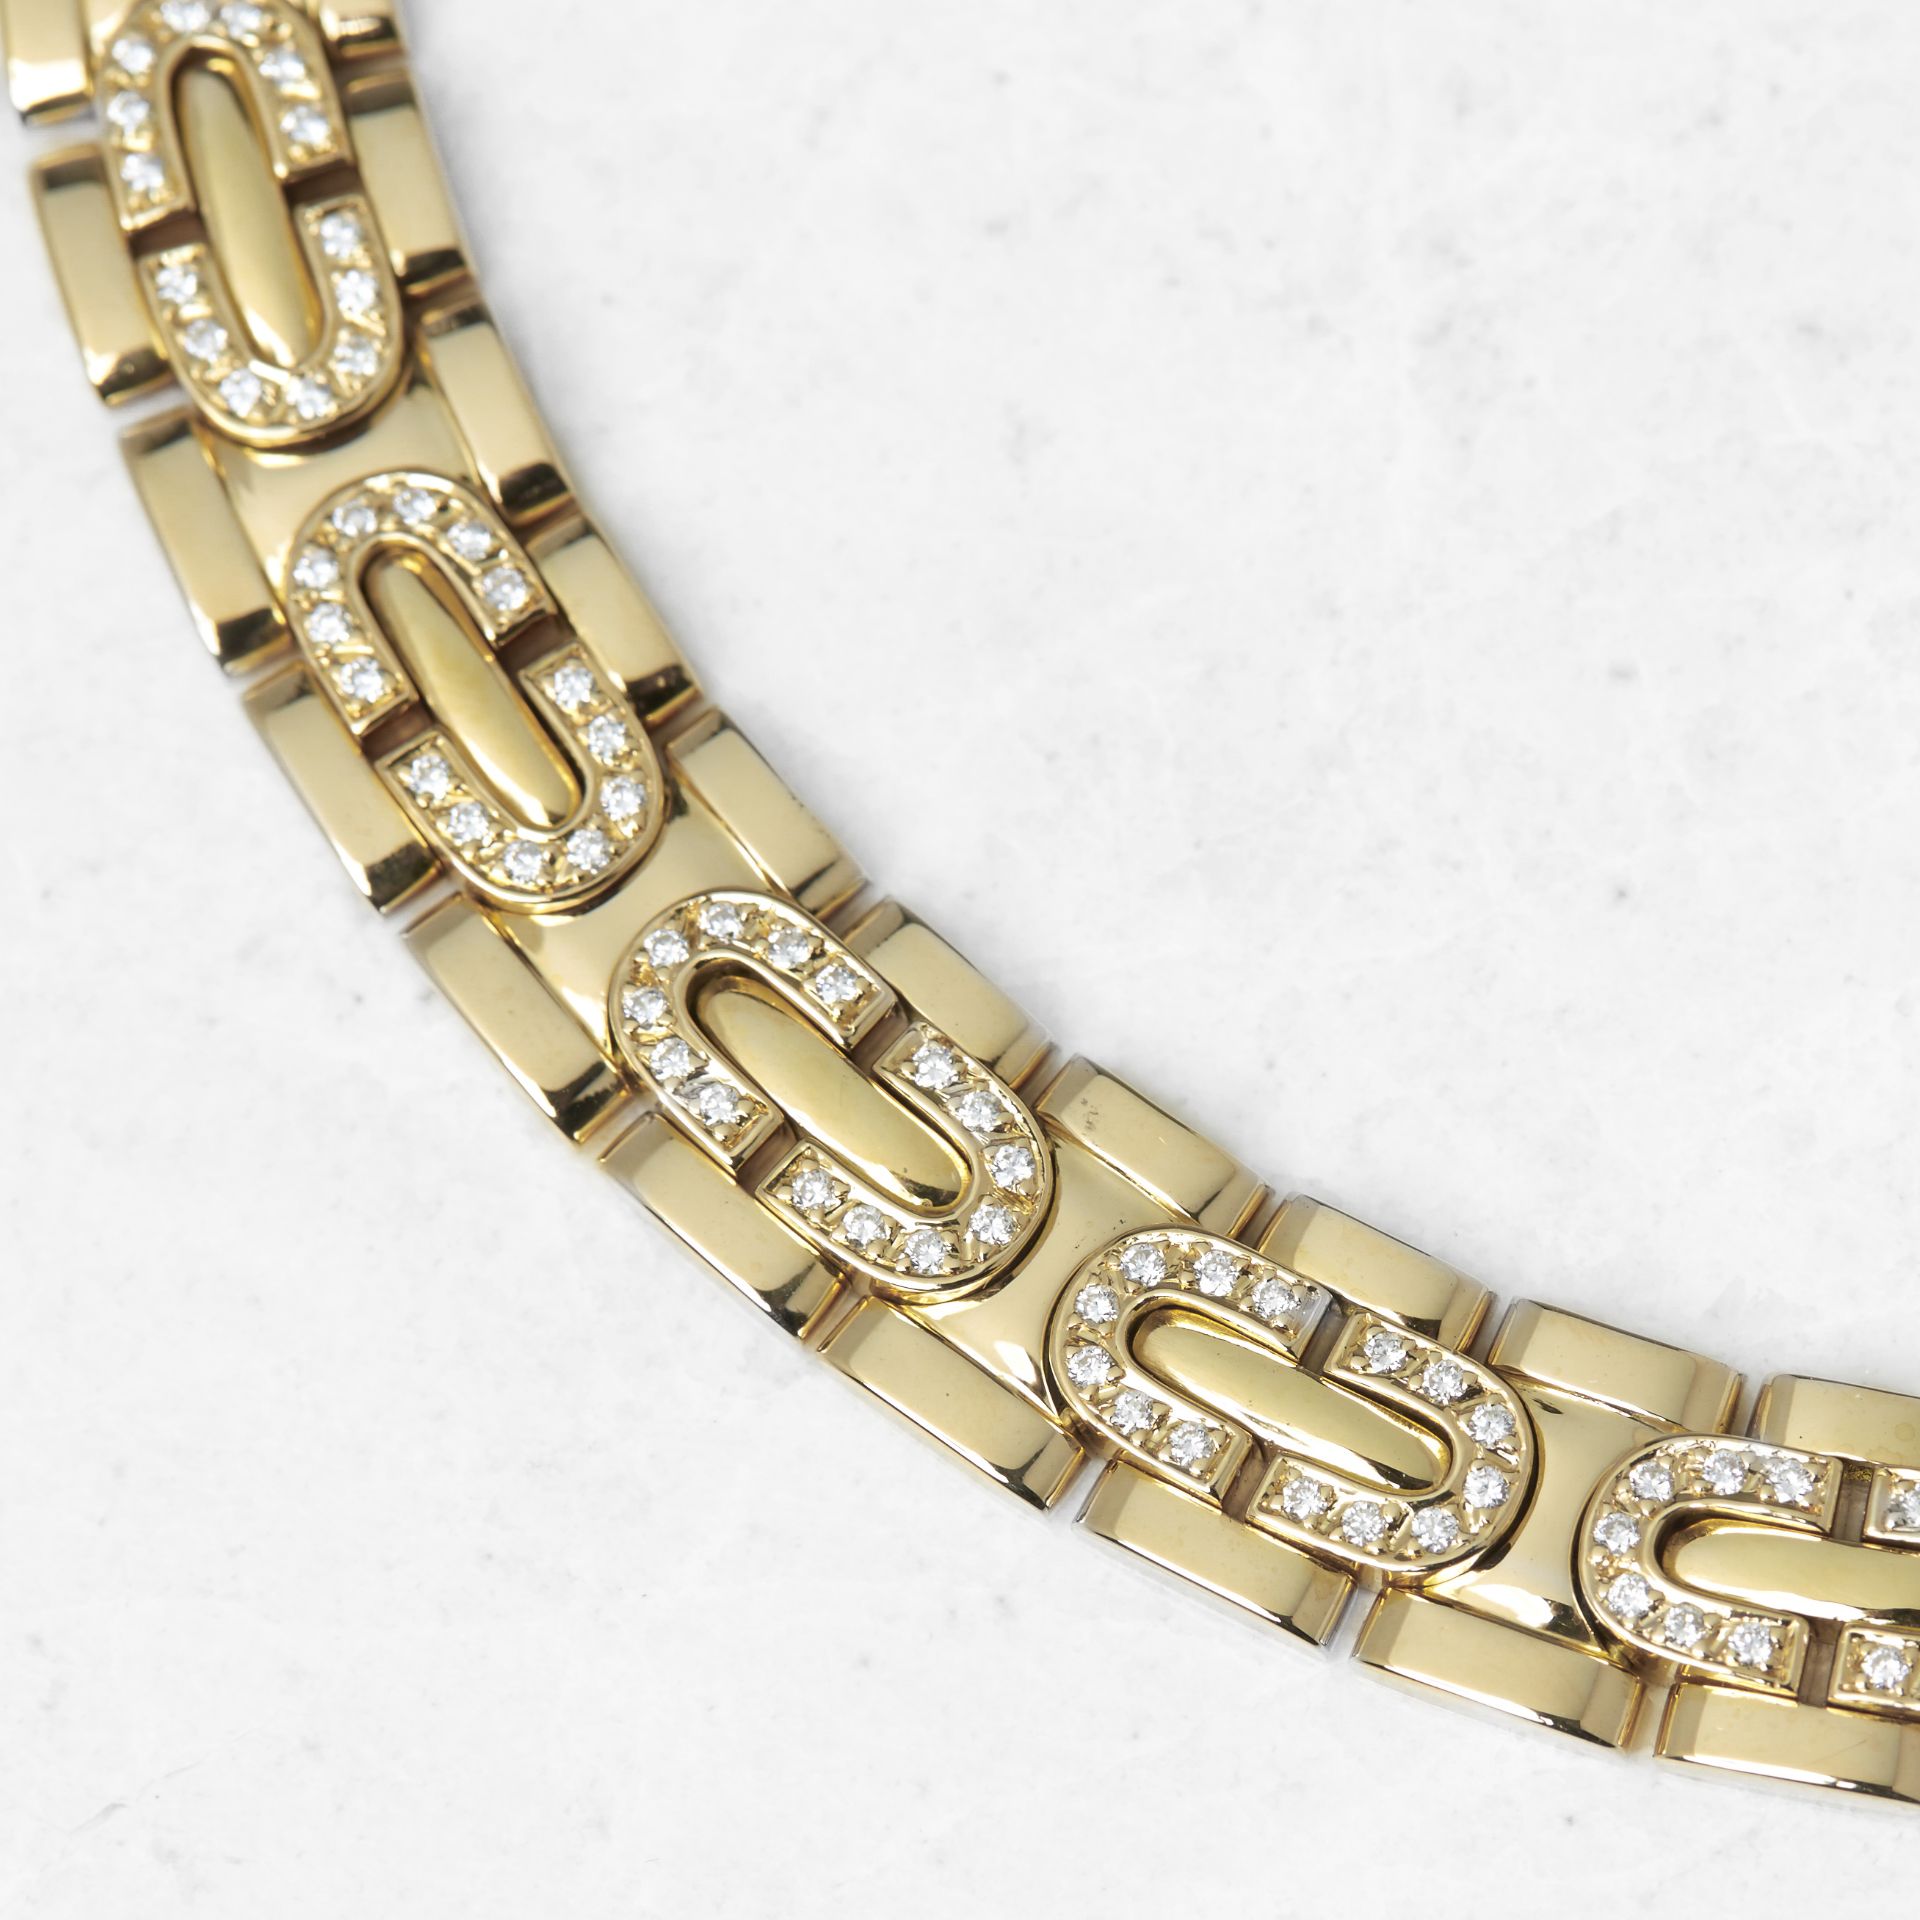 Cartier 18k Yellow Gold Oval Link Collar 0.70ct Diamond Maillon Necklace with Box, Certs & papers - Image 8 of 14